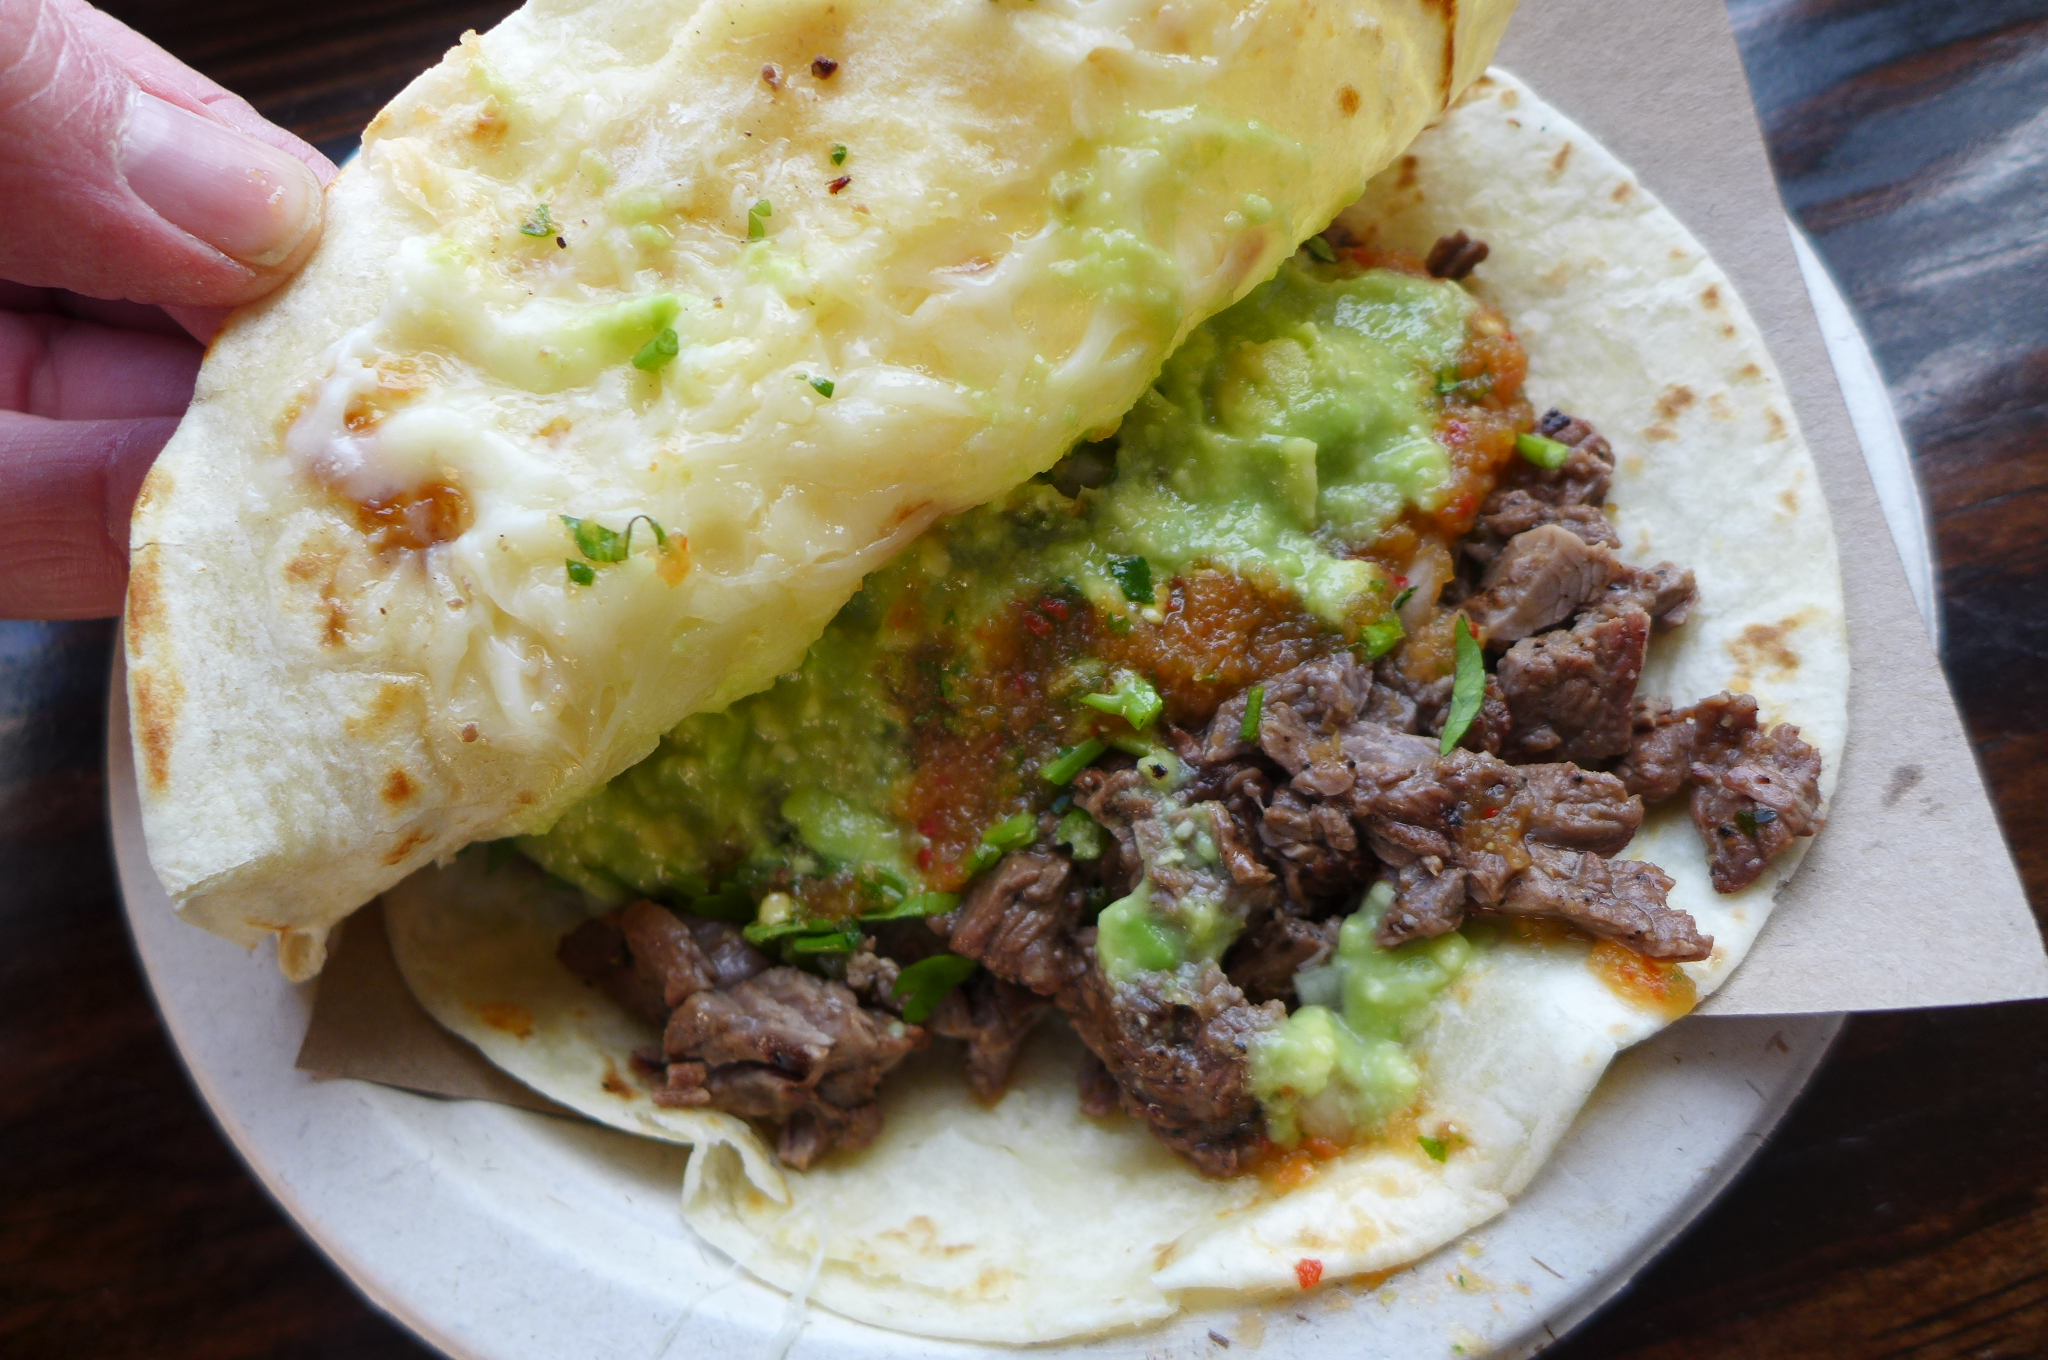 A flour gringa, like a quesadilla with cheese and grilled beef inside.